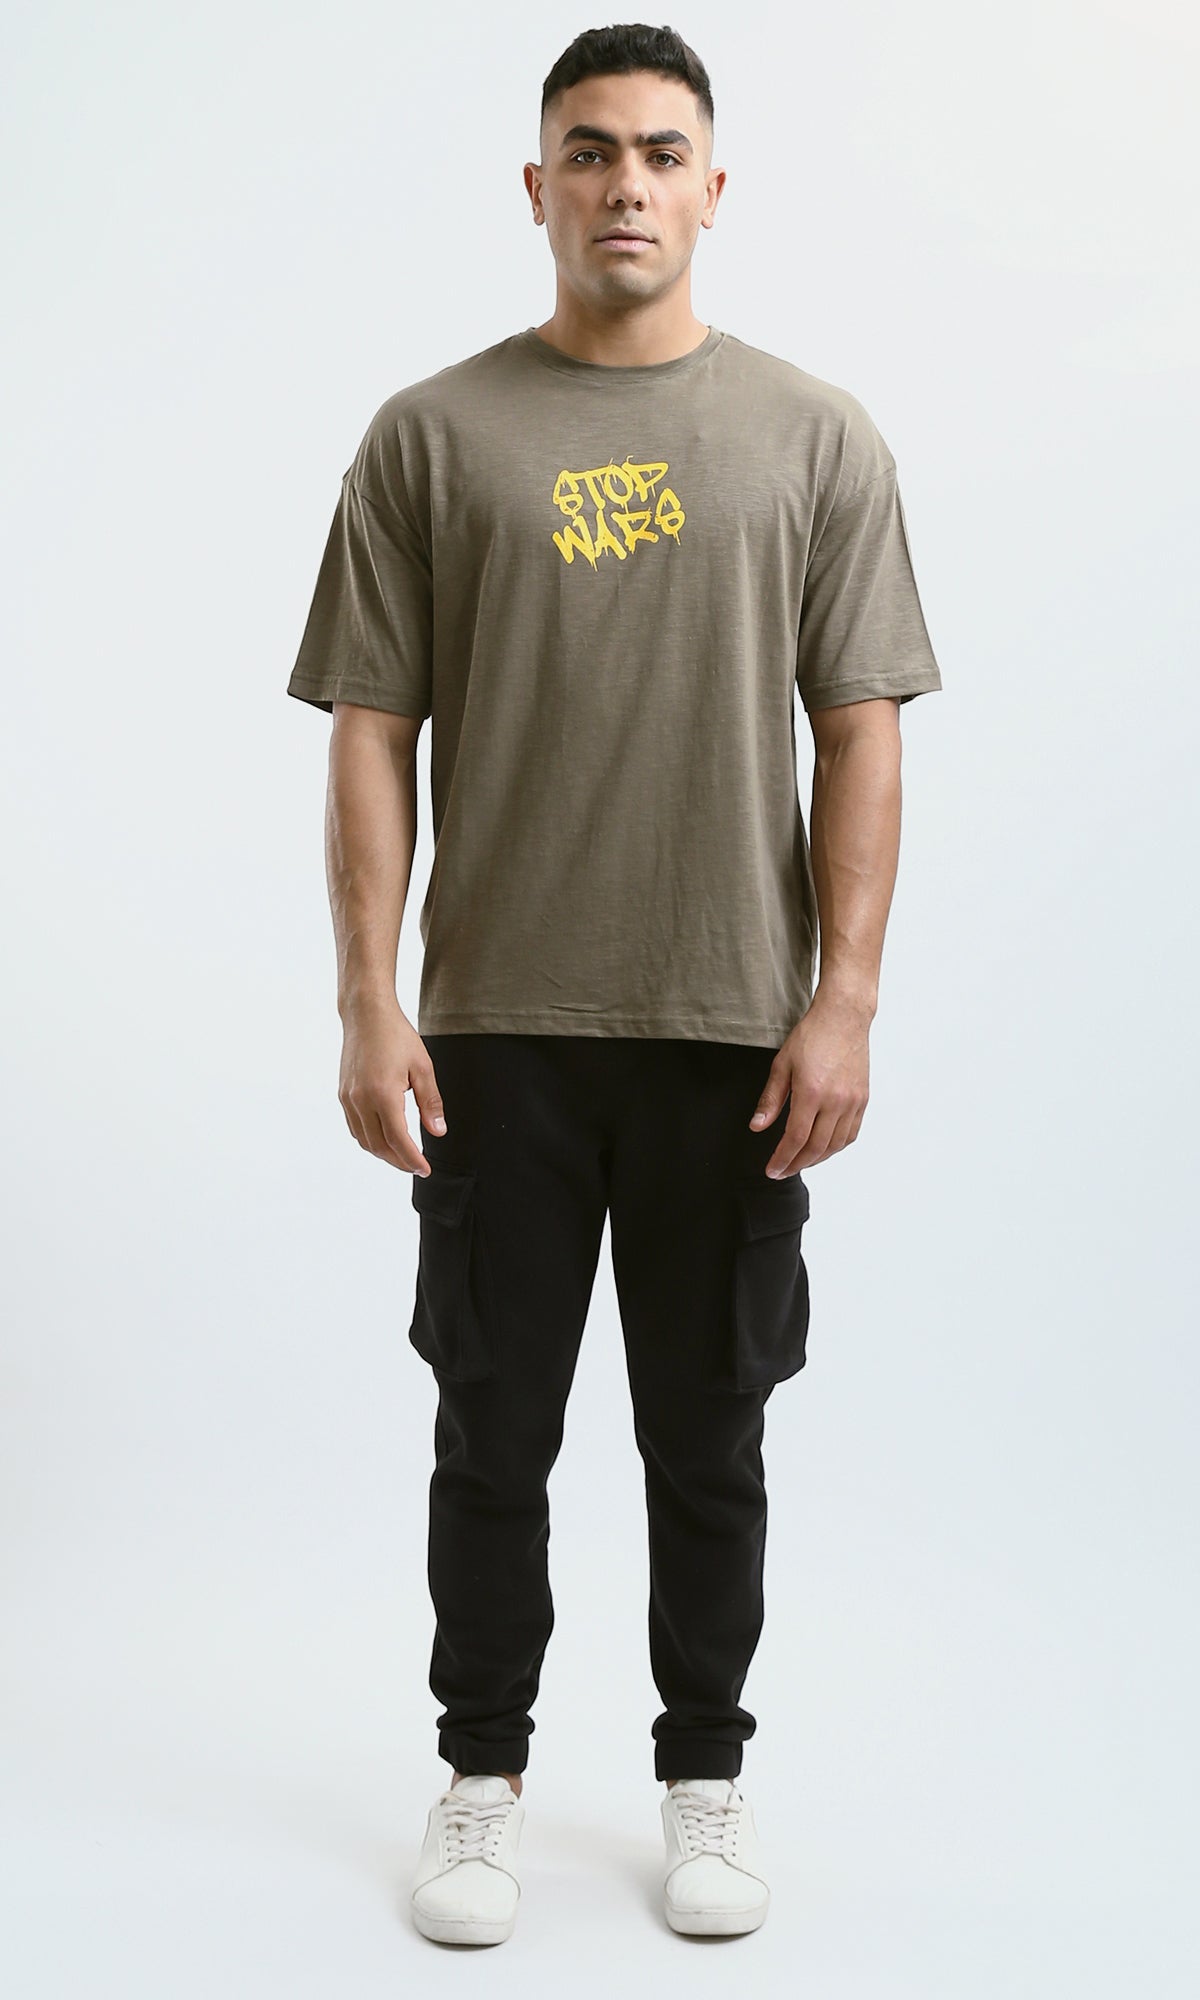 O179365 Printed "Stop Wars" Relaxed Fit Heather Dark Khaki Tee